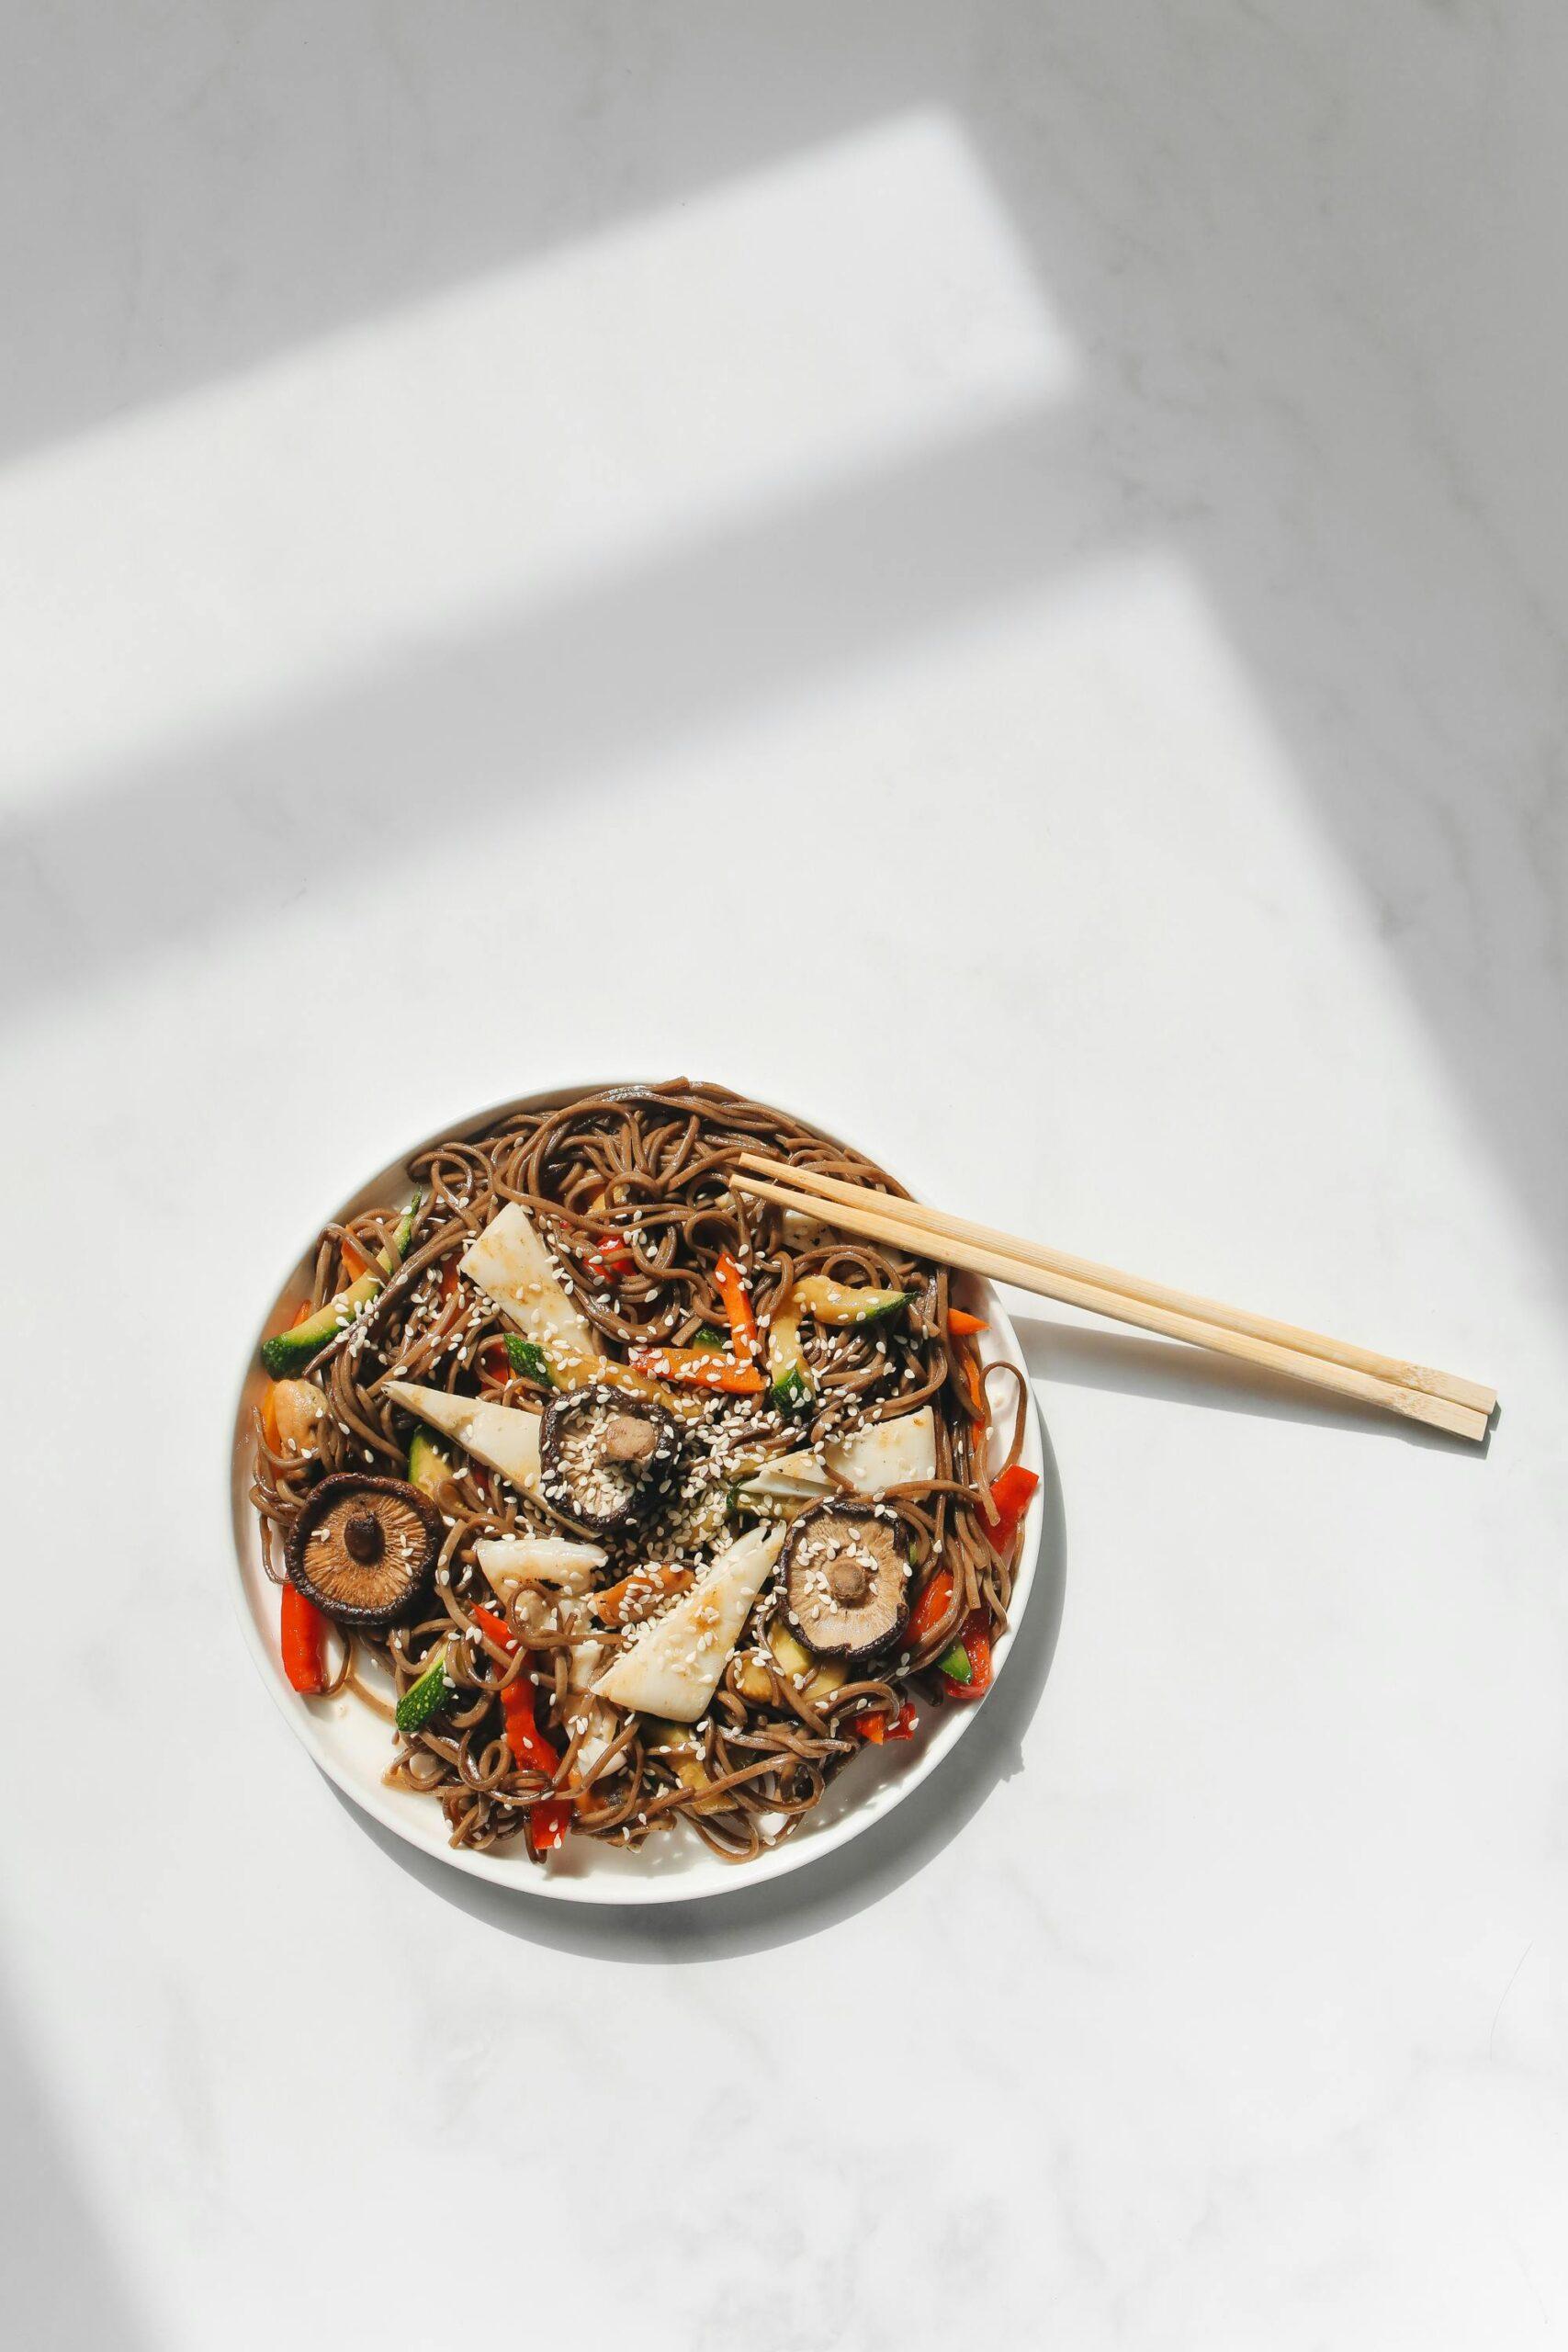 Plate of sesame noodles and veggies with chopsticks on a white countertop